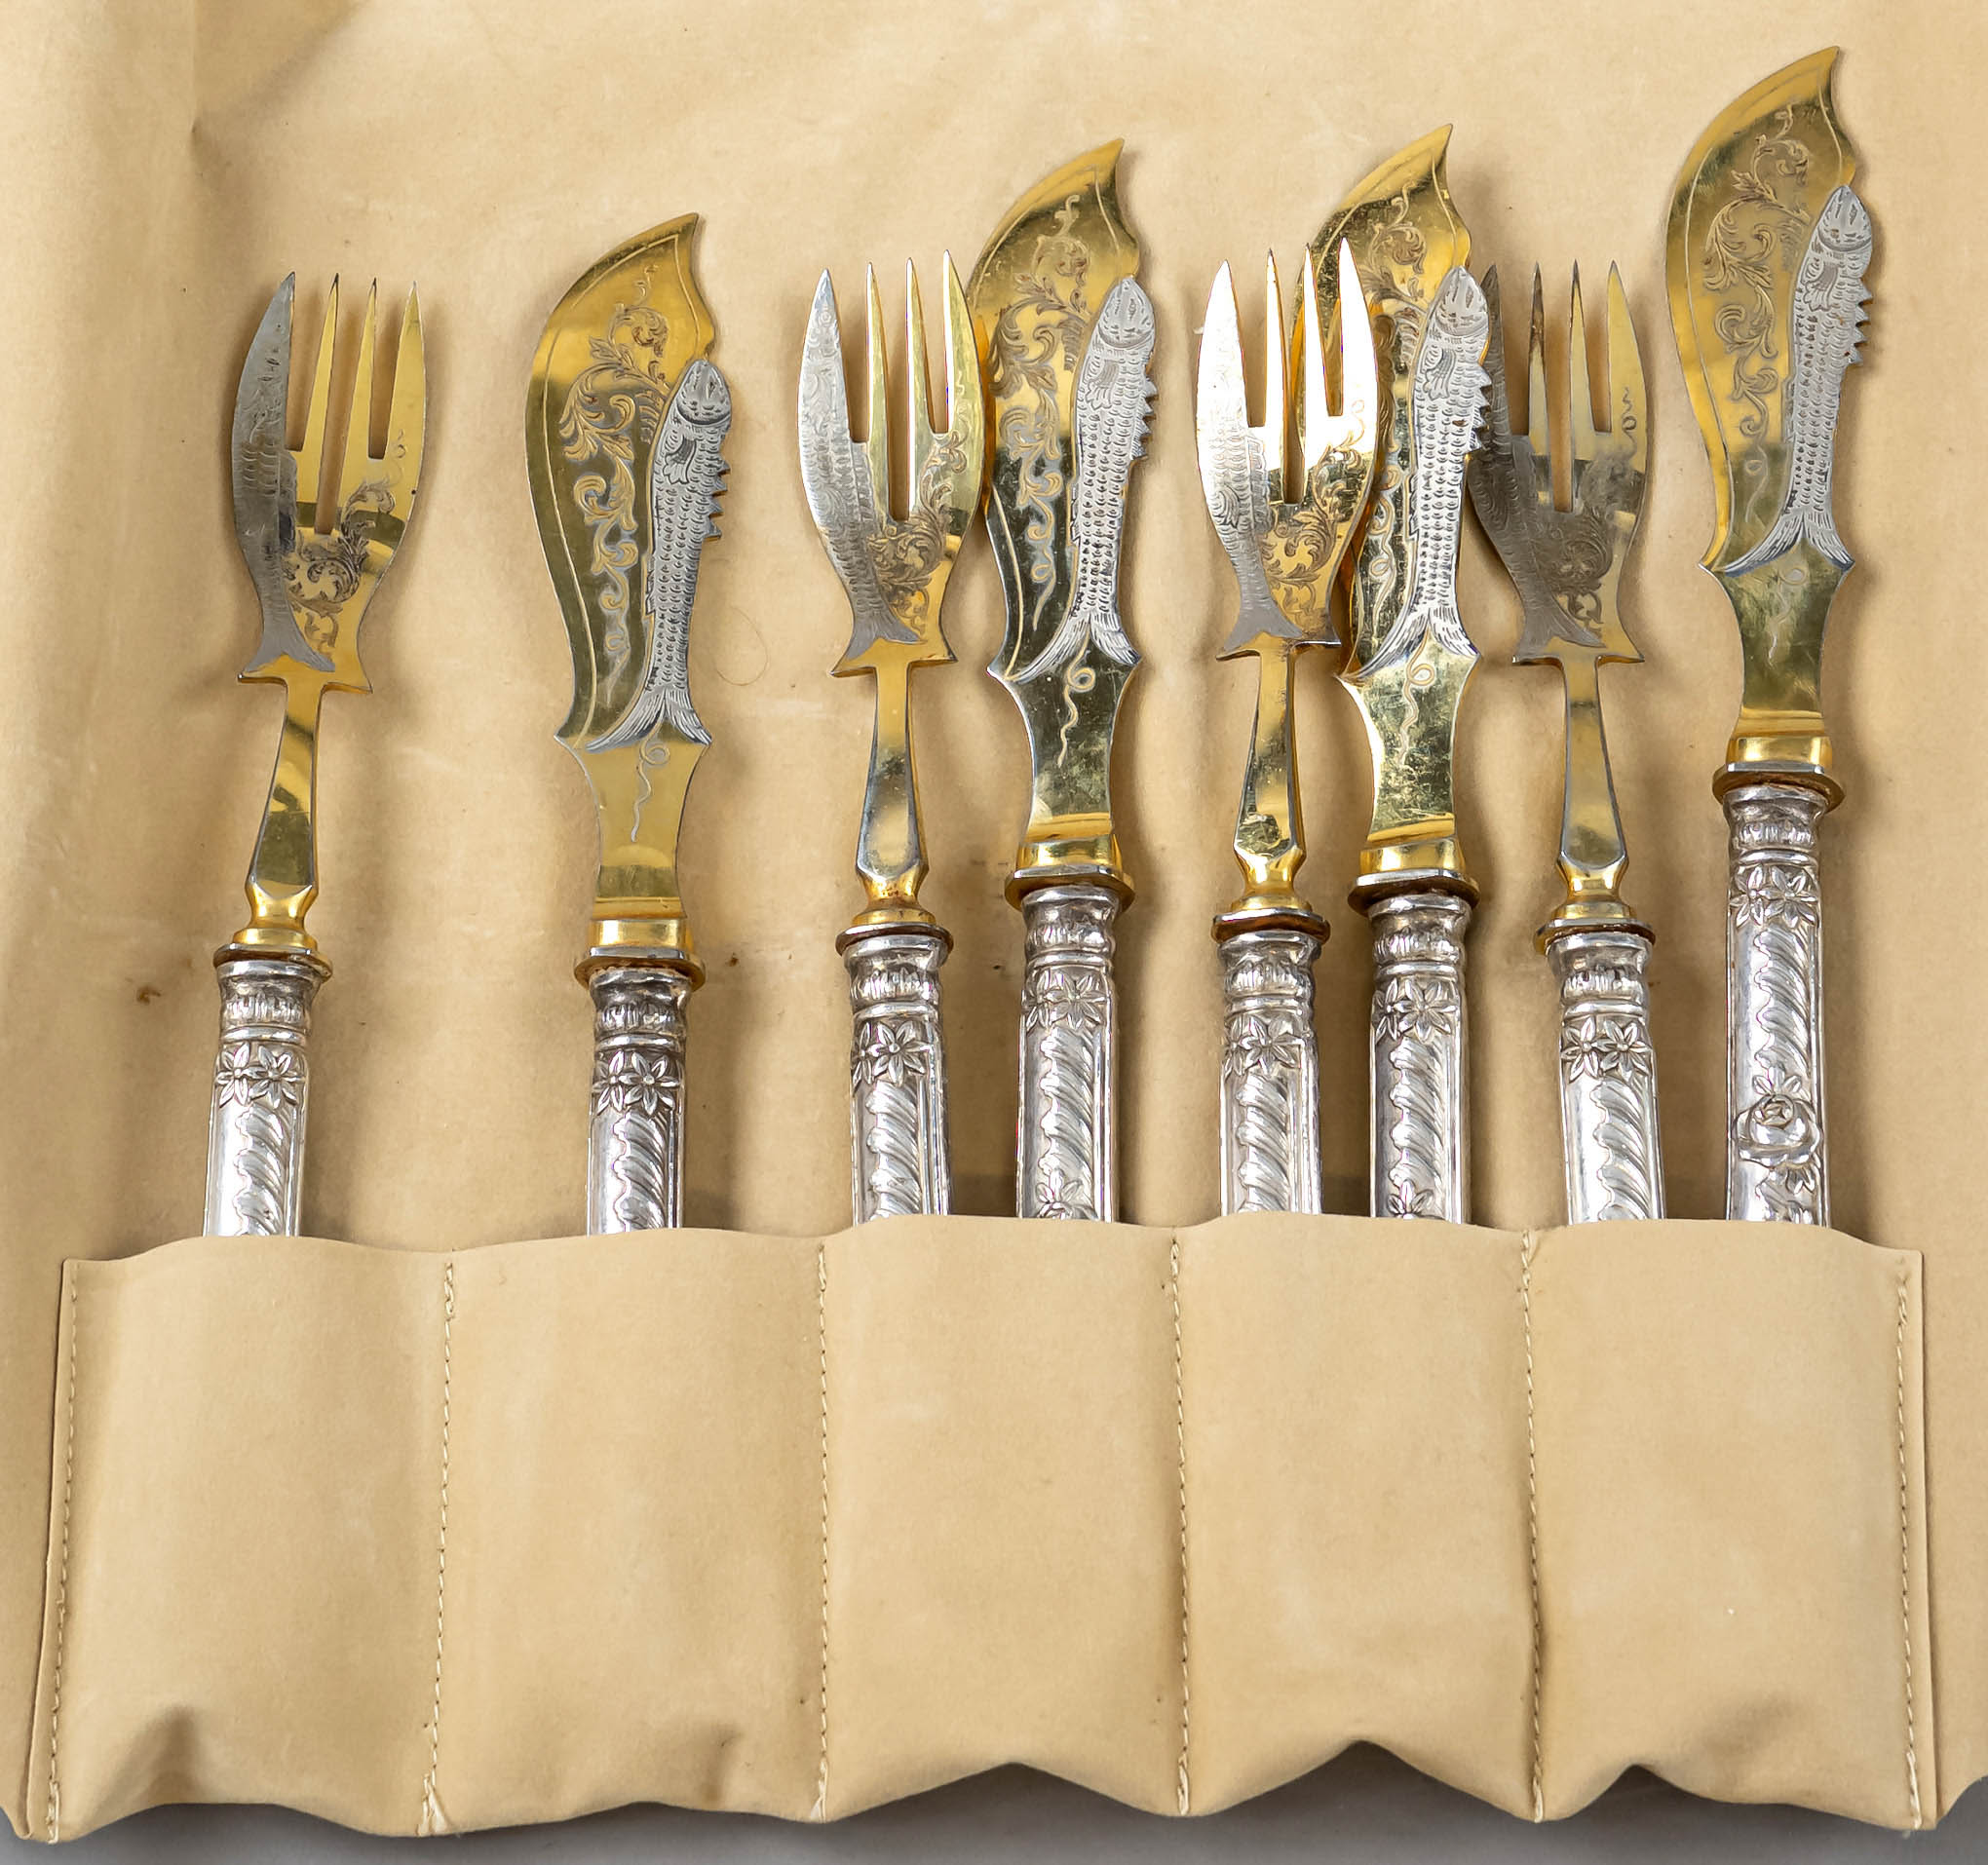 Fish cutlery for four persons, around 1900, silver tested, partial gilding, filled pistol handles